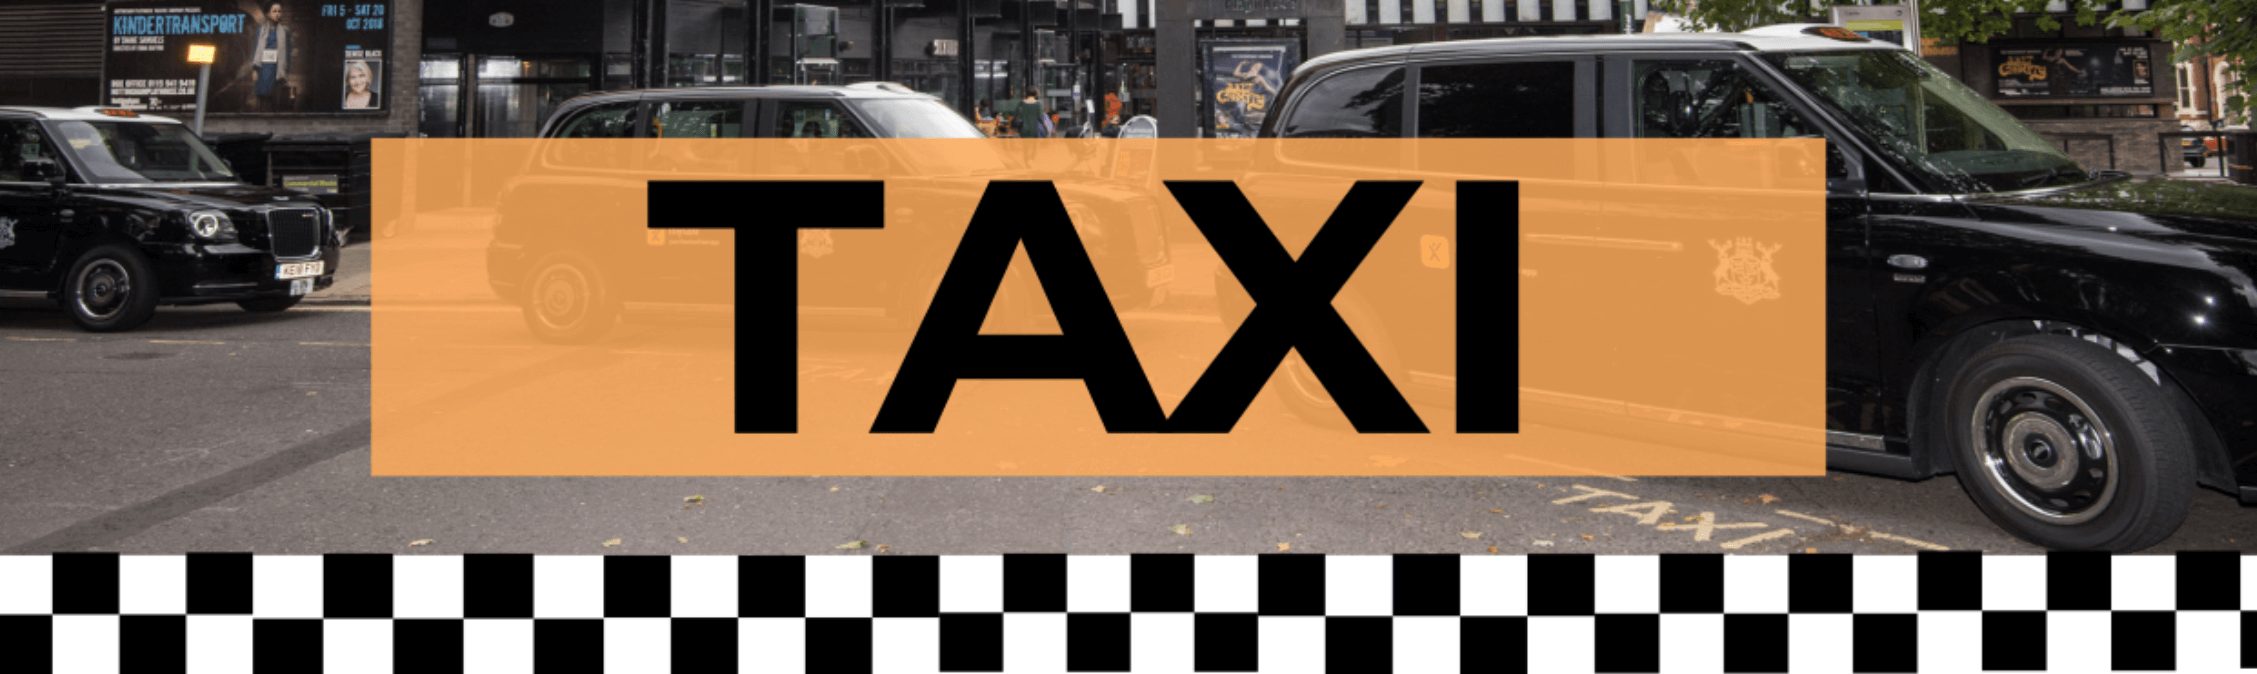 Taxi banner